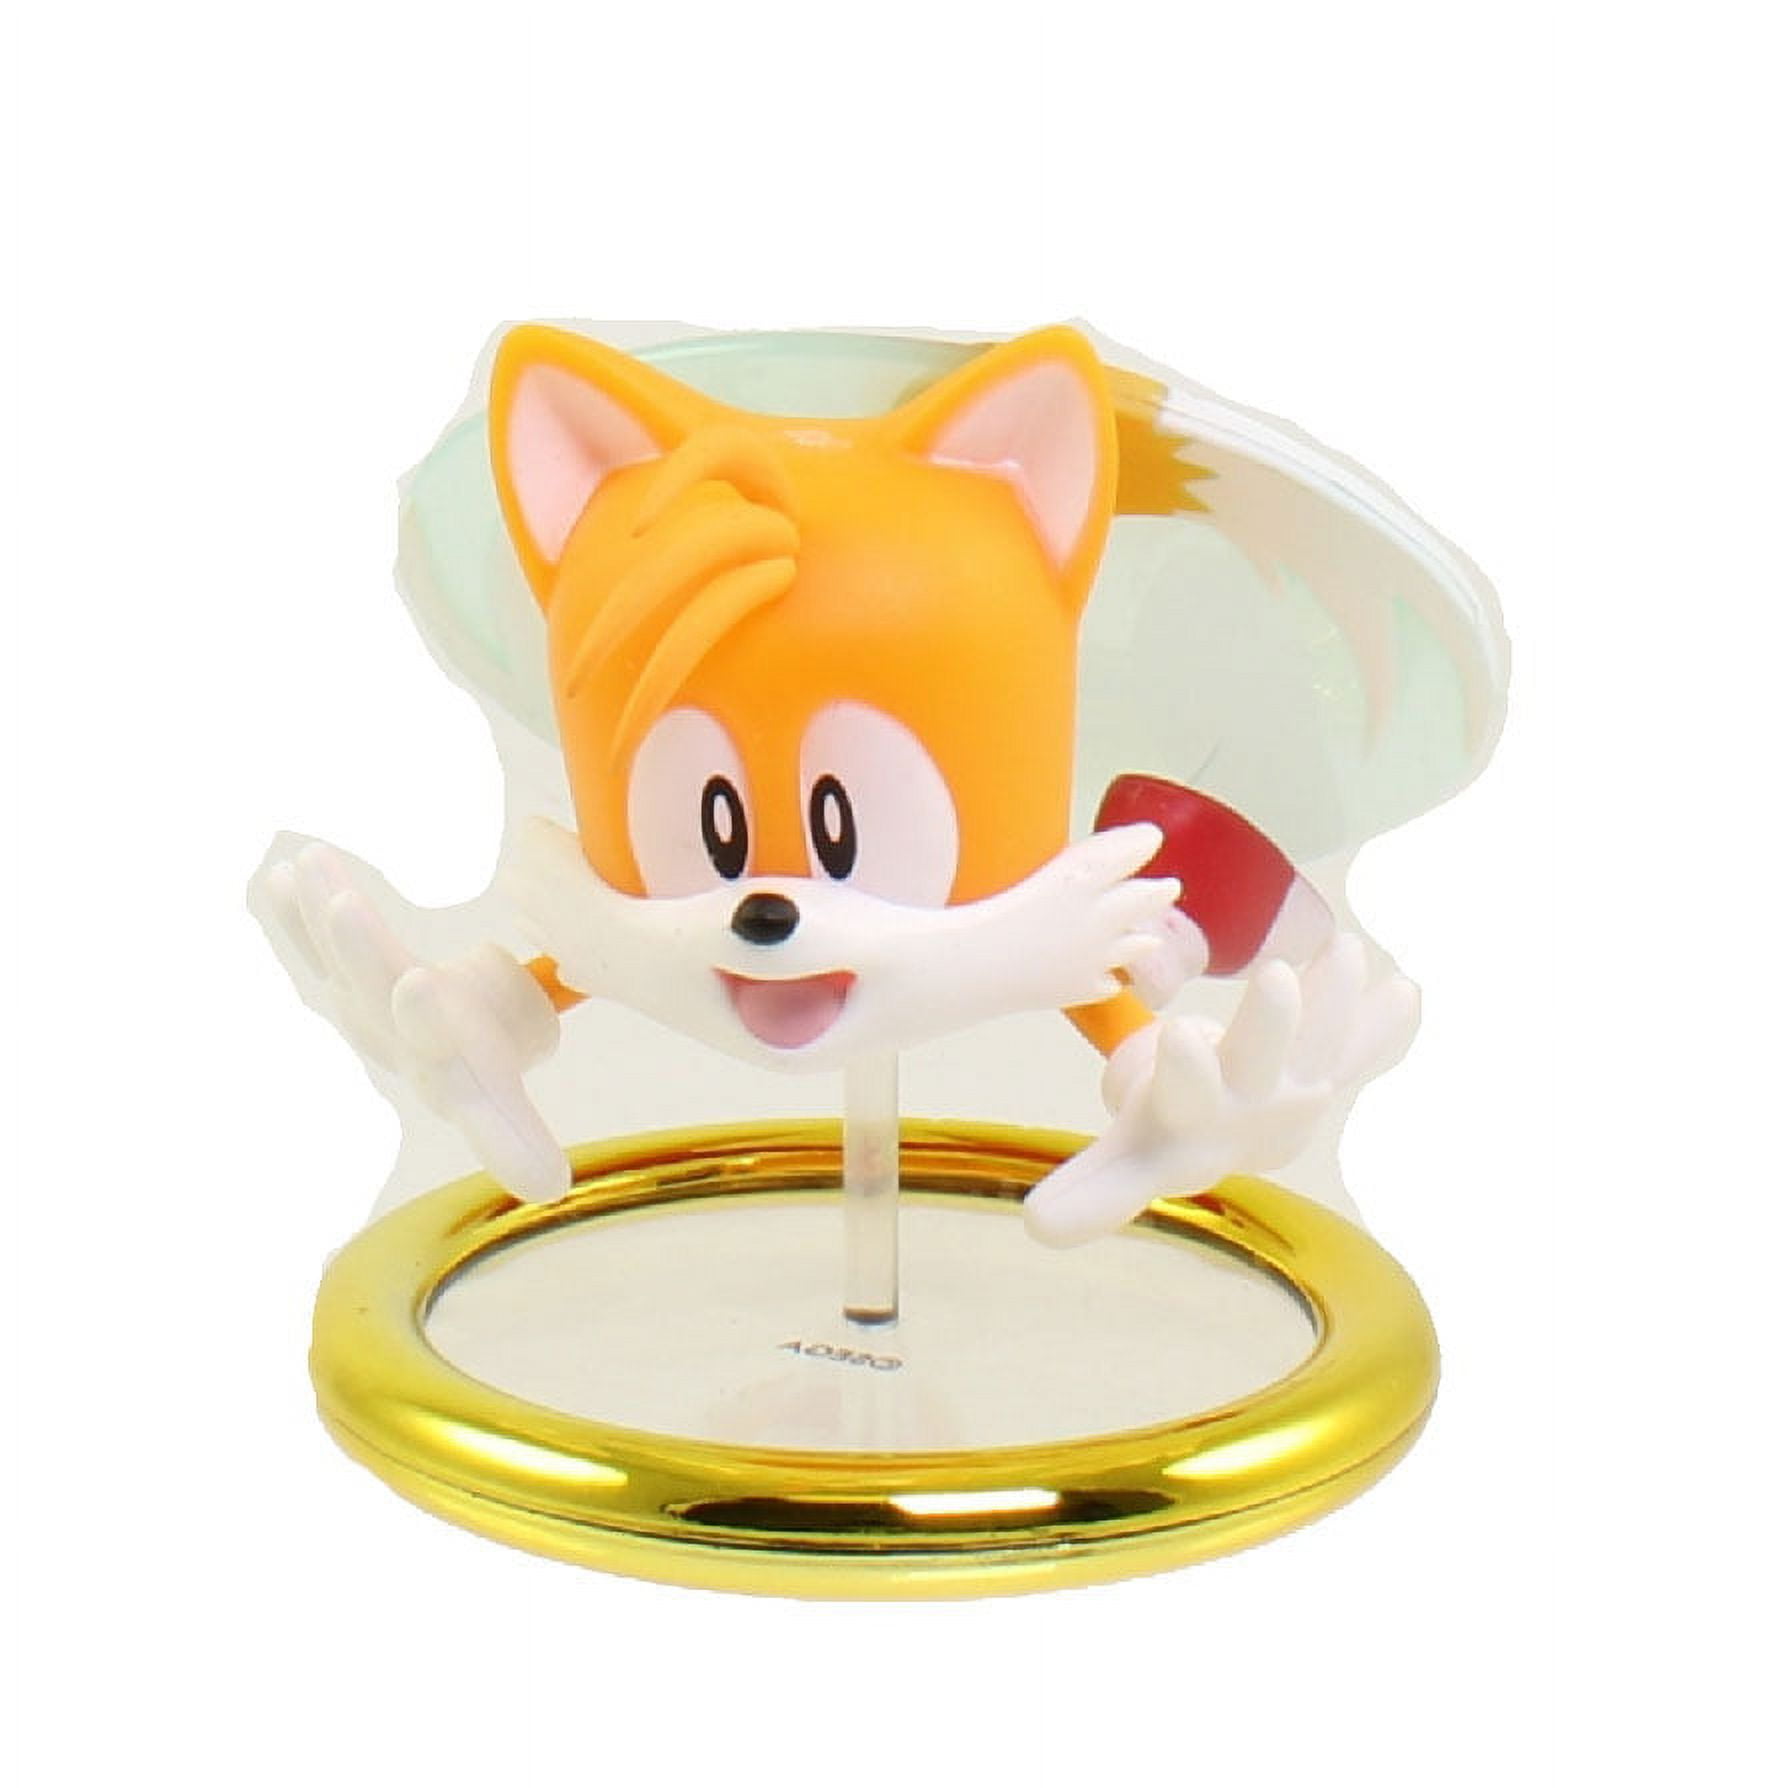 Sonic the Hedgehog 3 Vinyl Figure Sonic and Tails 2-Pack - Kidrobot